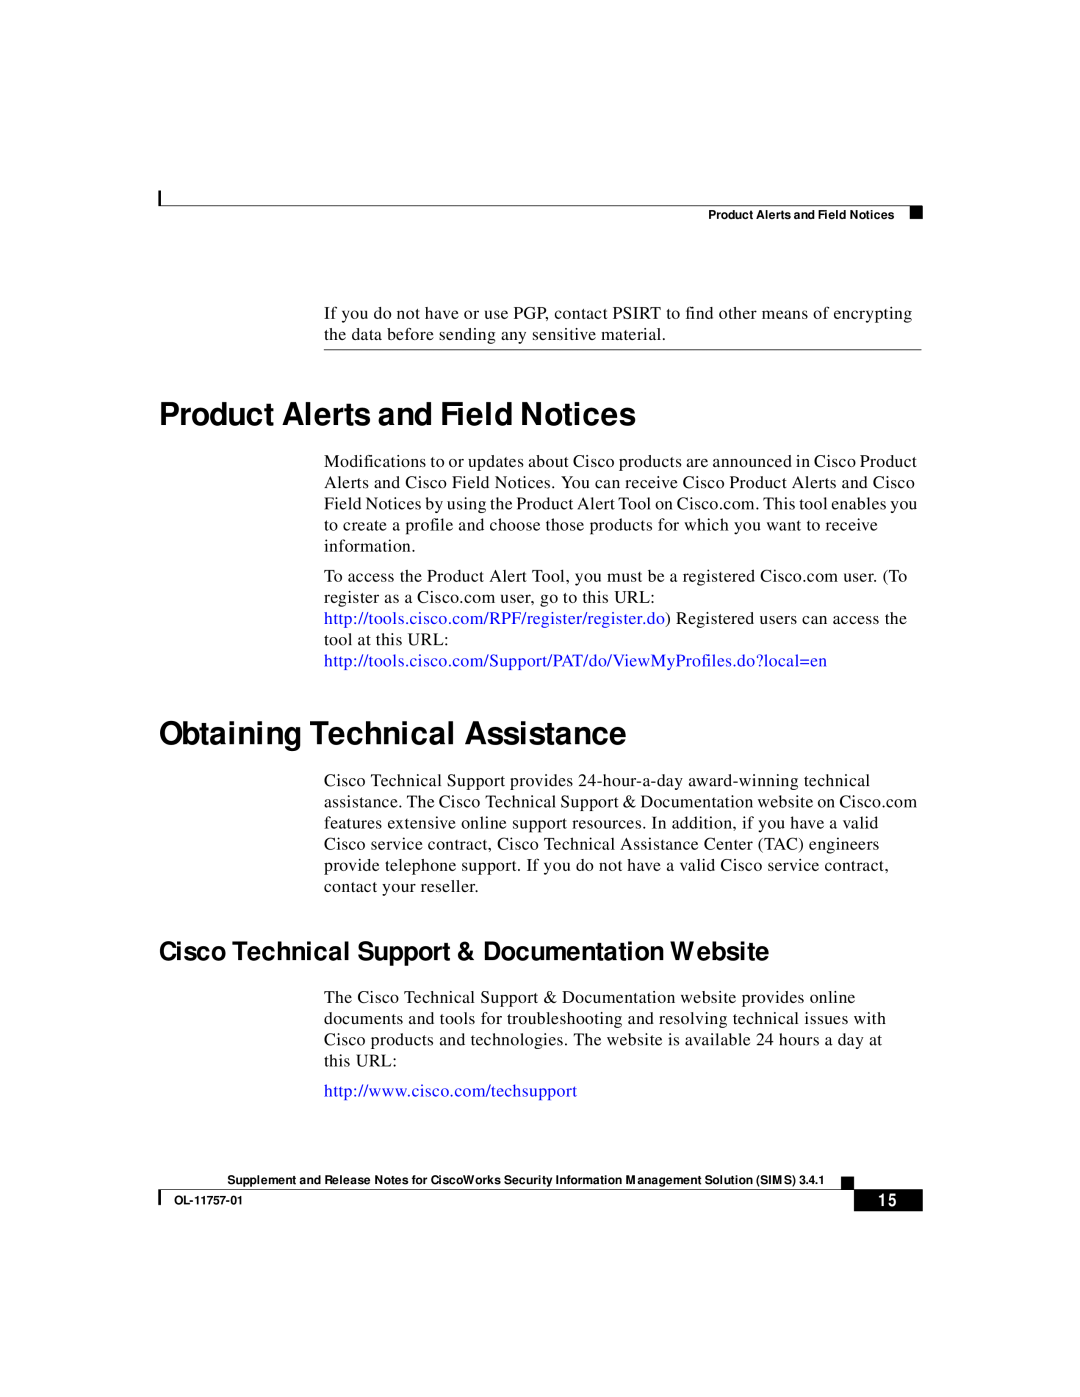 Cisco Systems OL-11757-01 manual Product Alerts and Field Notices, Obtaining Technical Assistance 